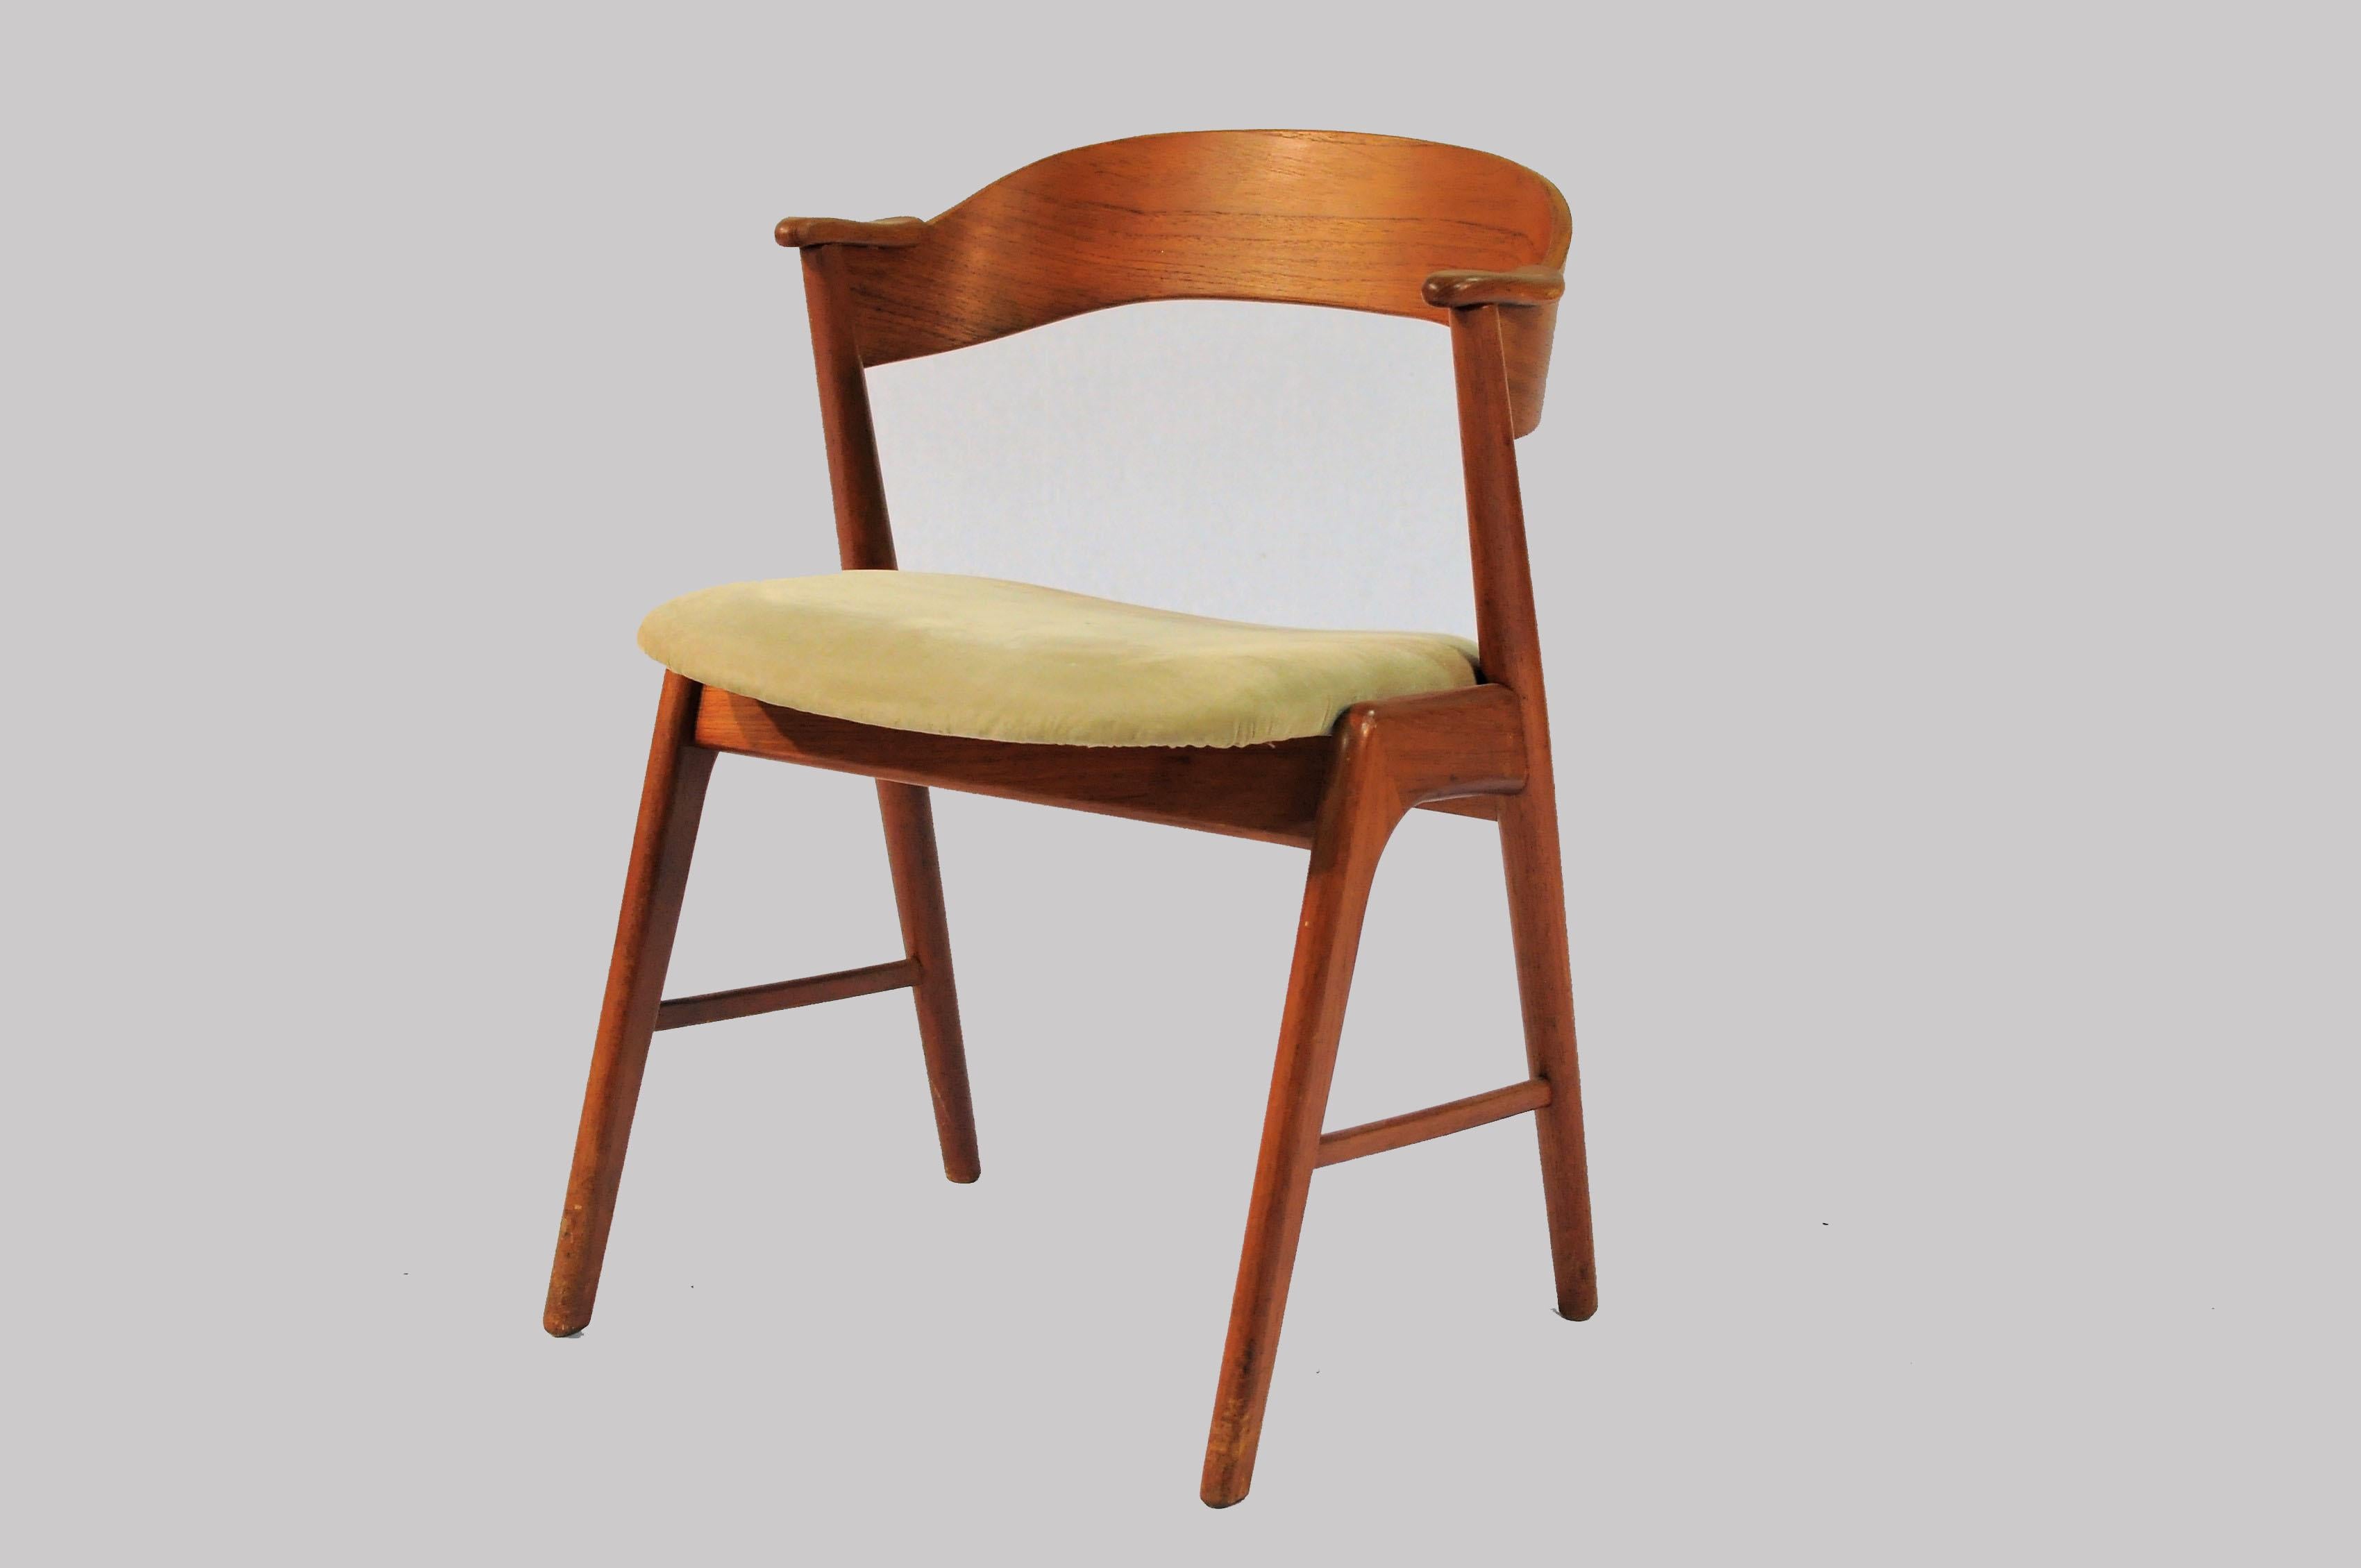 Set of eight fully restored and refinished dining chairs in teak with curved backrests and elegant frames. The chairs are commonly known as model 32 produced by Korup Stolefabrik in the 1960´s.

The well crafted chairs with their organic shapes